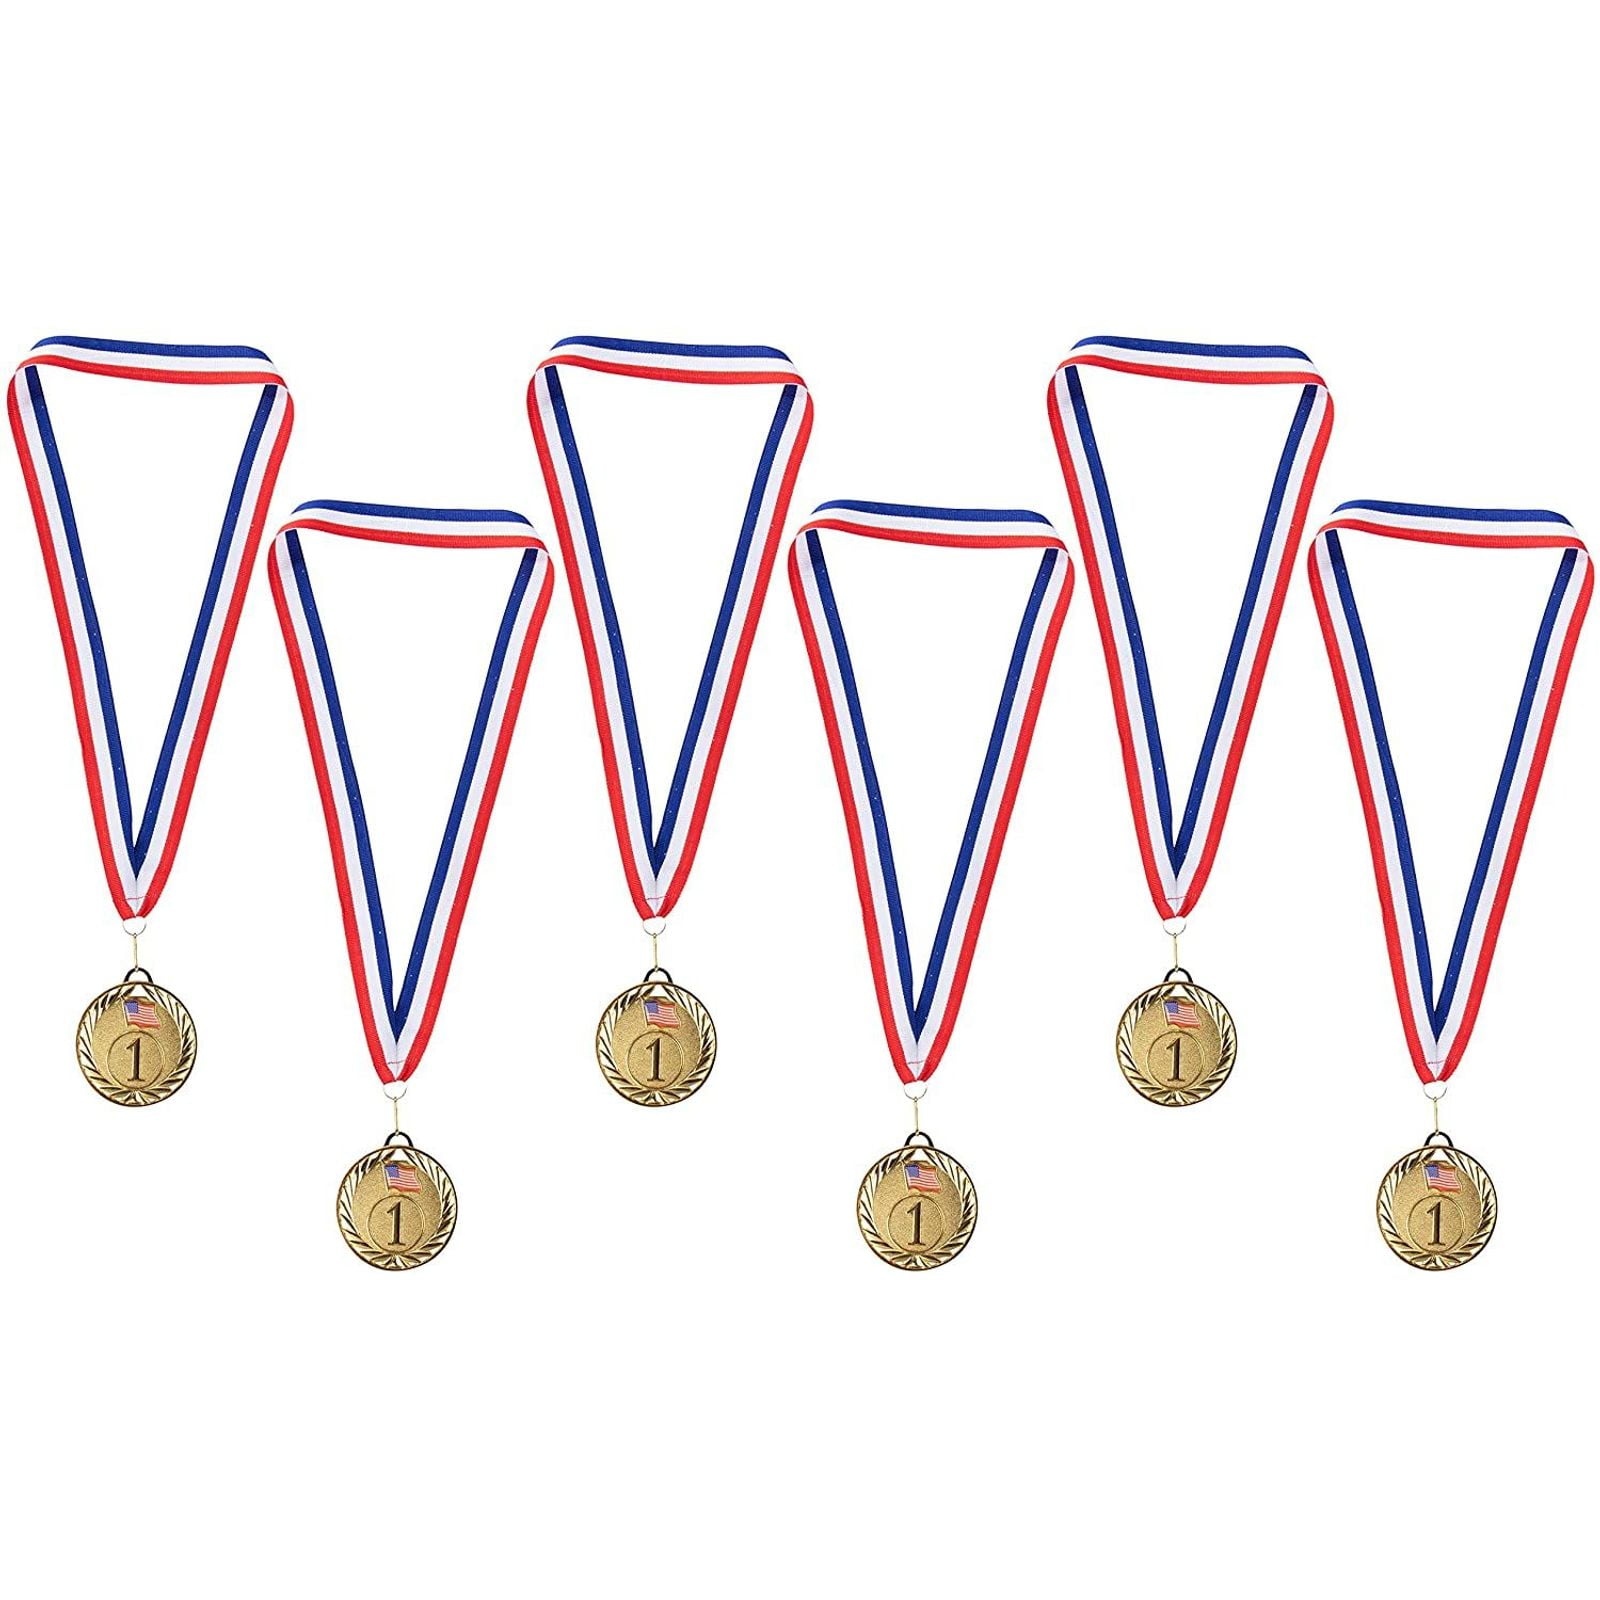 50 or 100 x SPORTS DAY Medals & Ribbons Gold Silver Bronze FREE ENGRAVING 25 